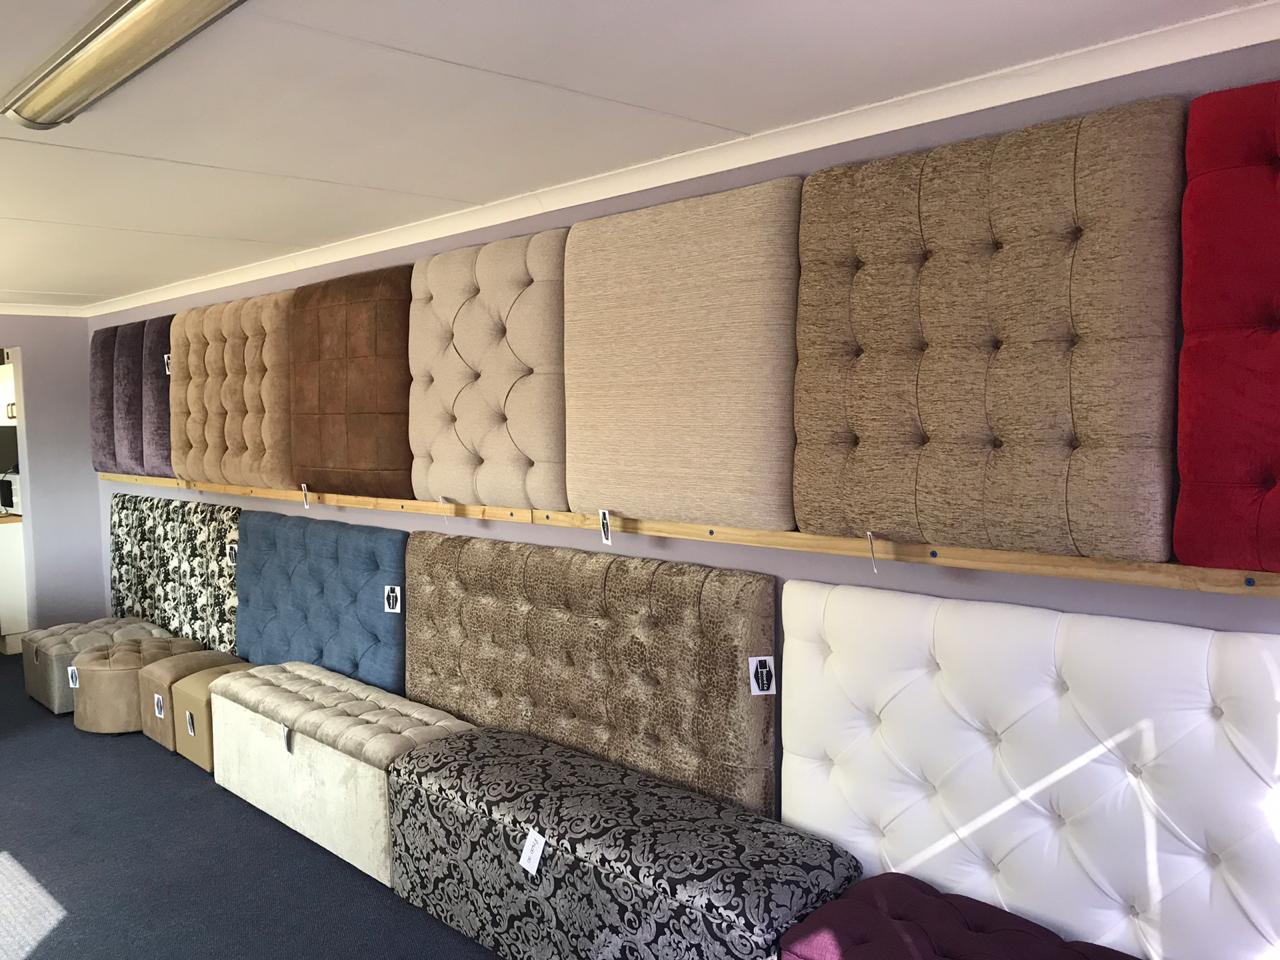 Gorgeous Headboards manufactured to perfection***